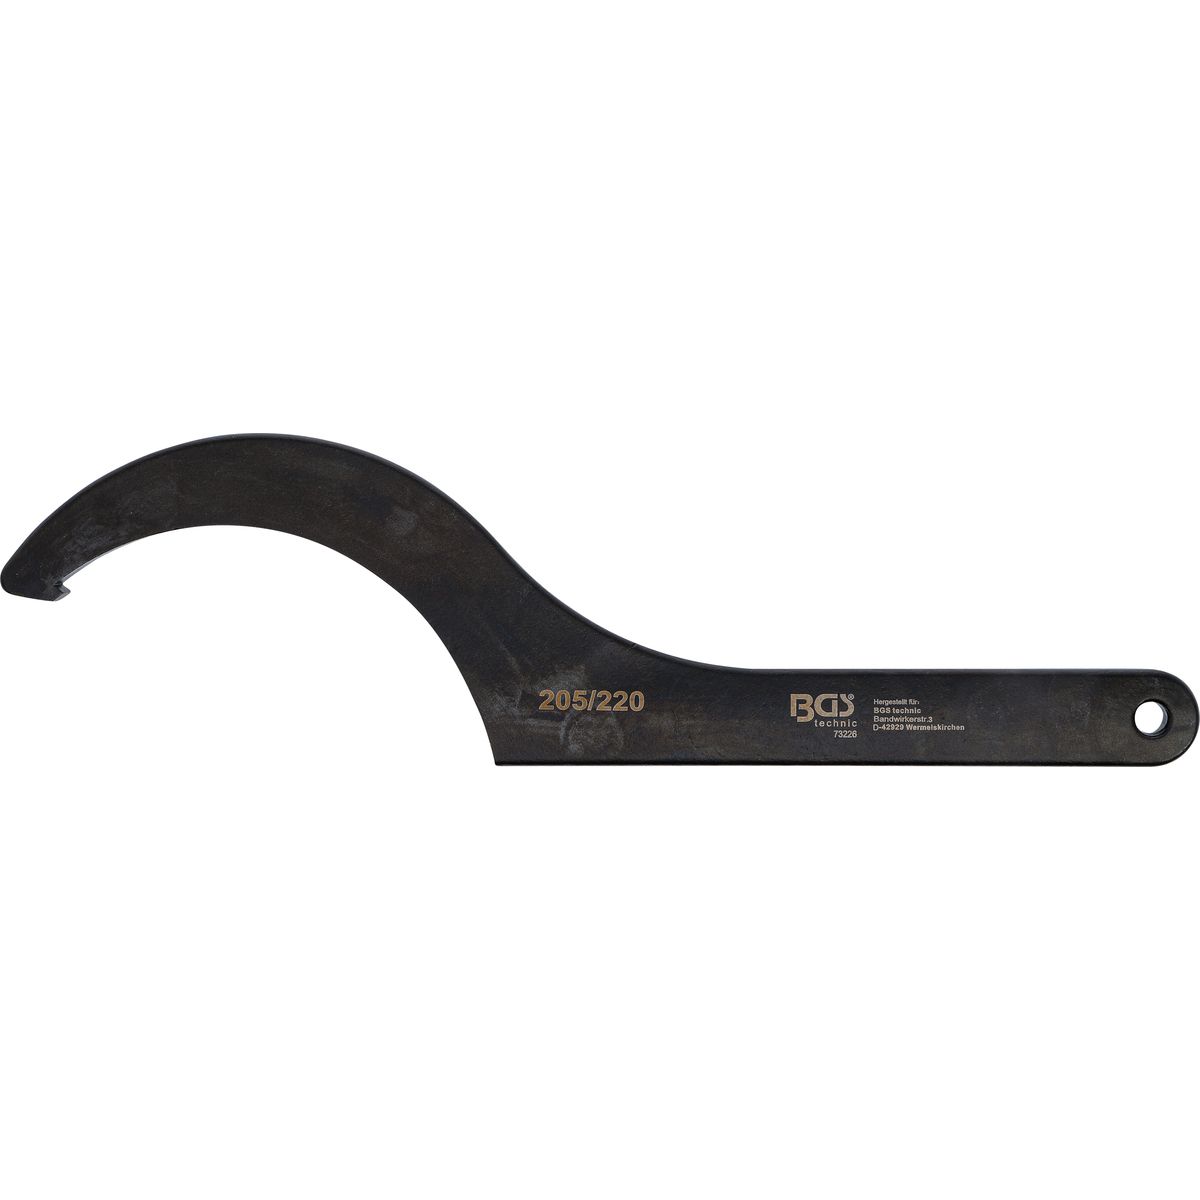 Hook Wrench with Nose | 205 - 220 mm